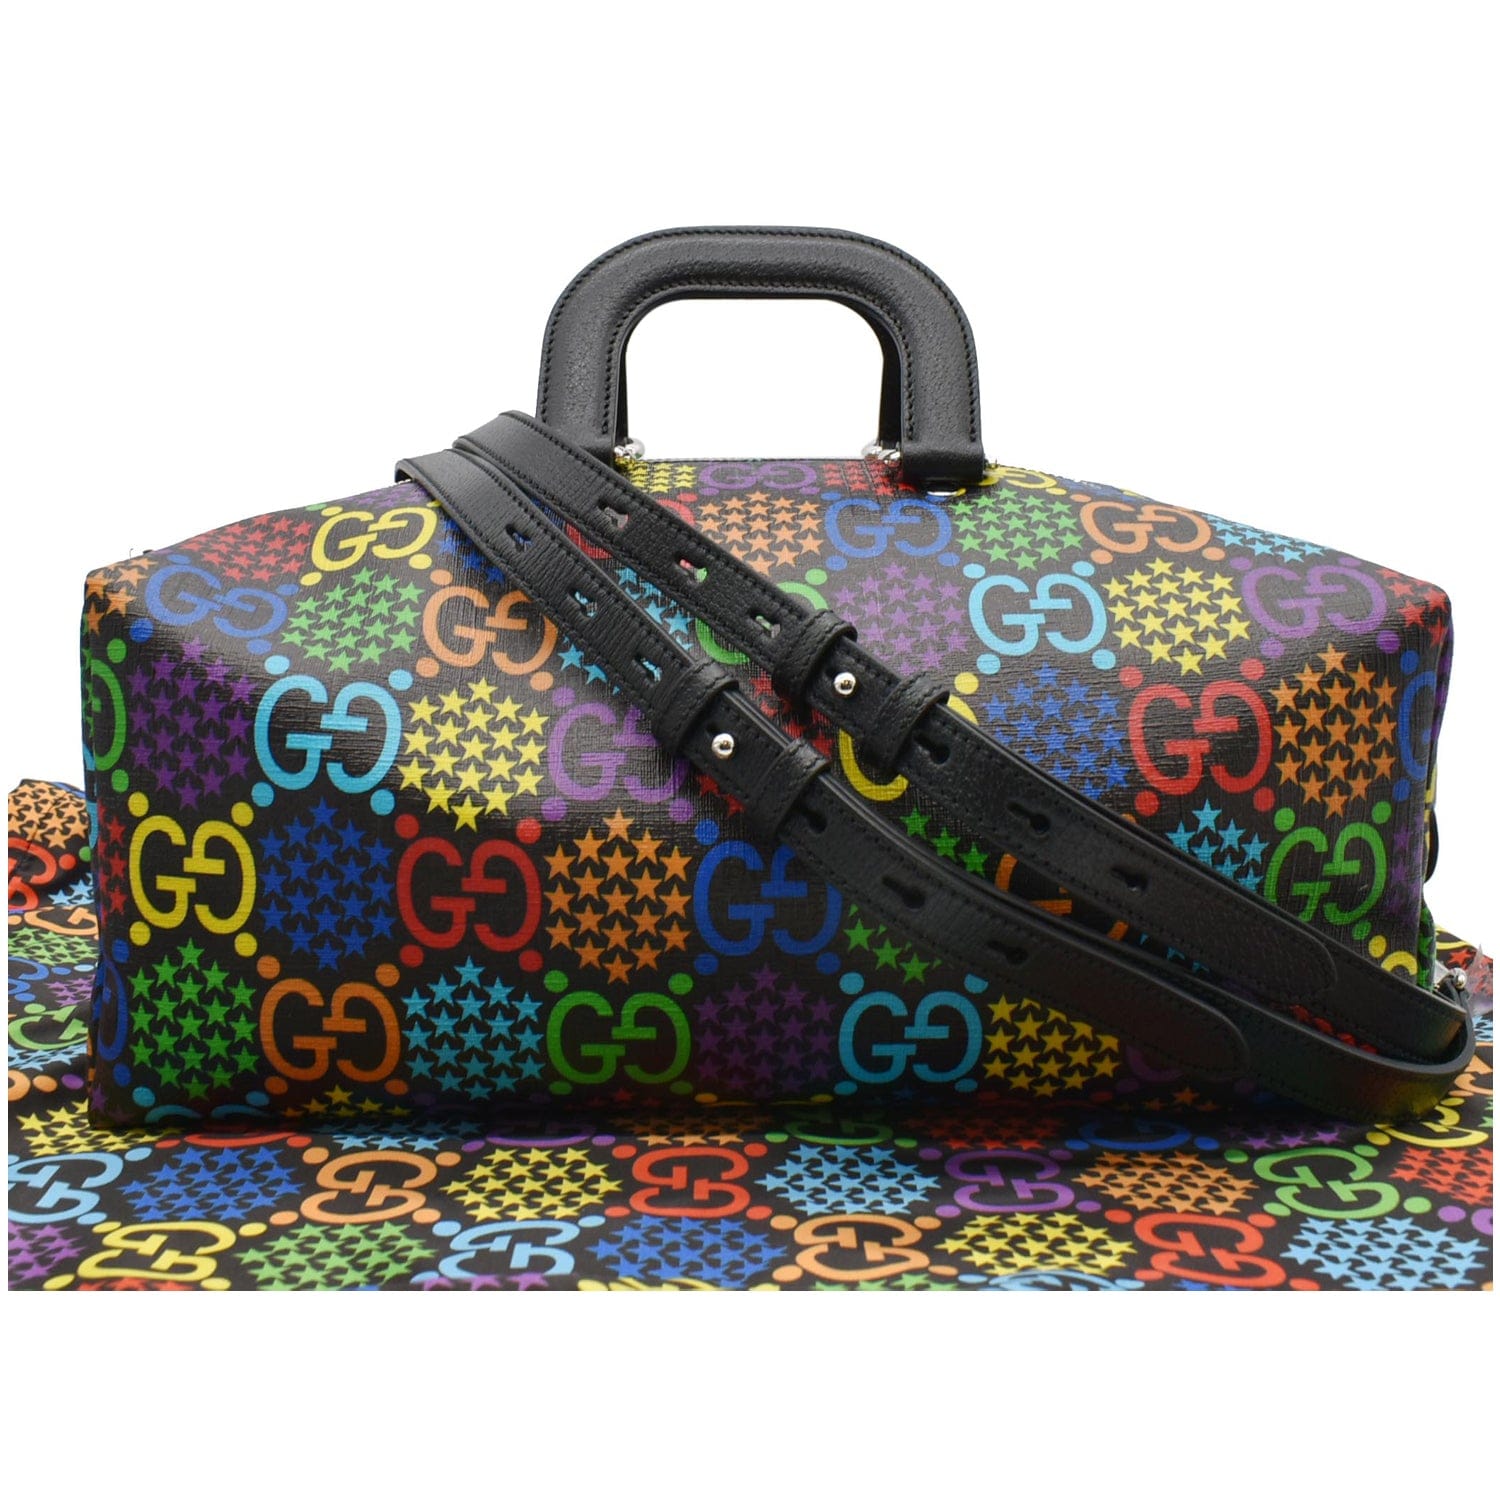 Gucci goes for the multicolor monogram in its latest collection